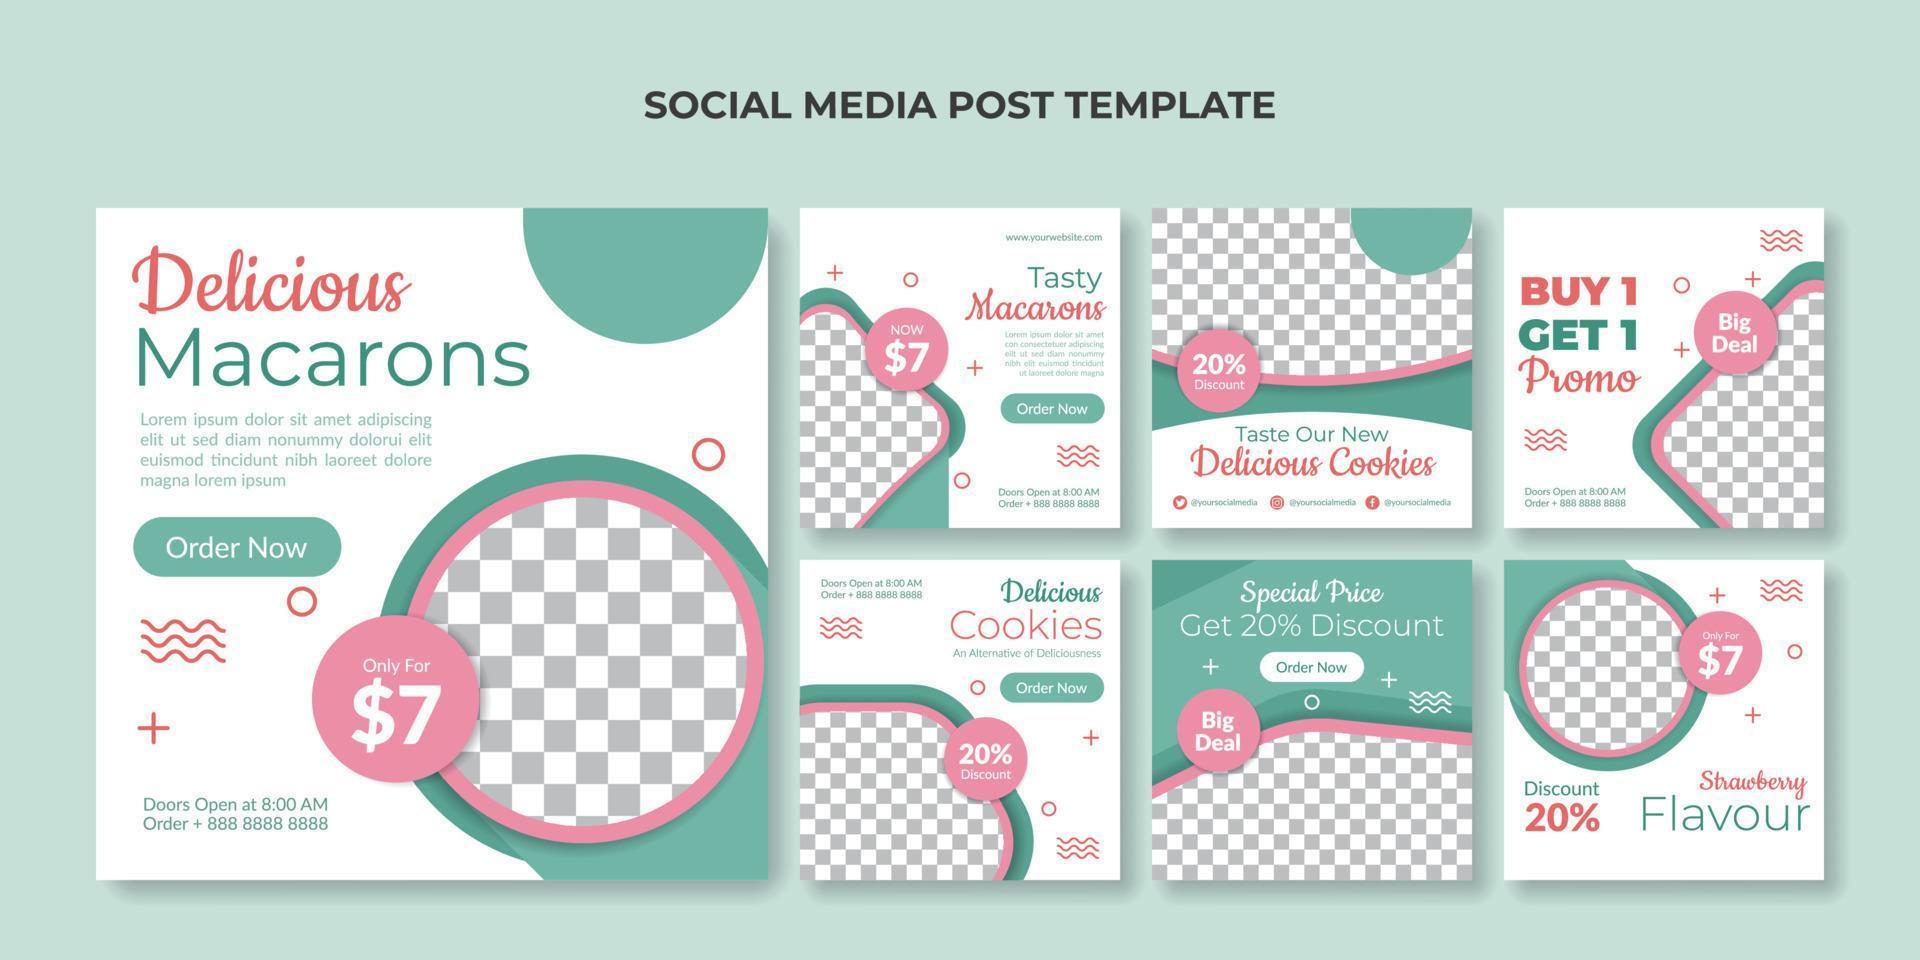 Macaron social media post template. Food square banner for cake shop vector